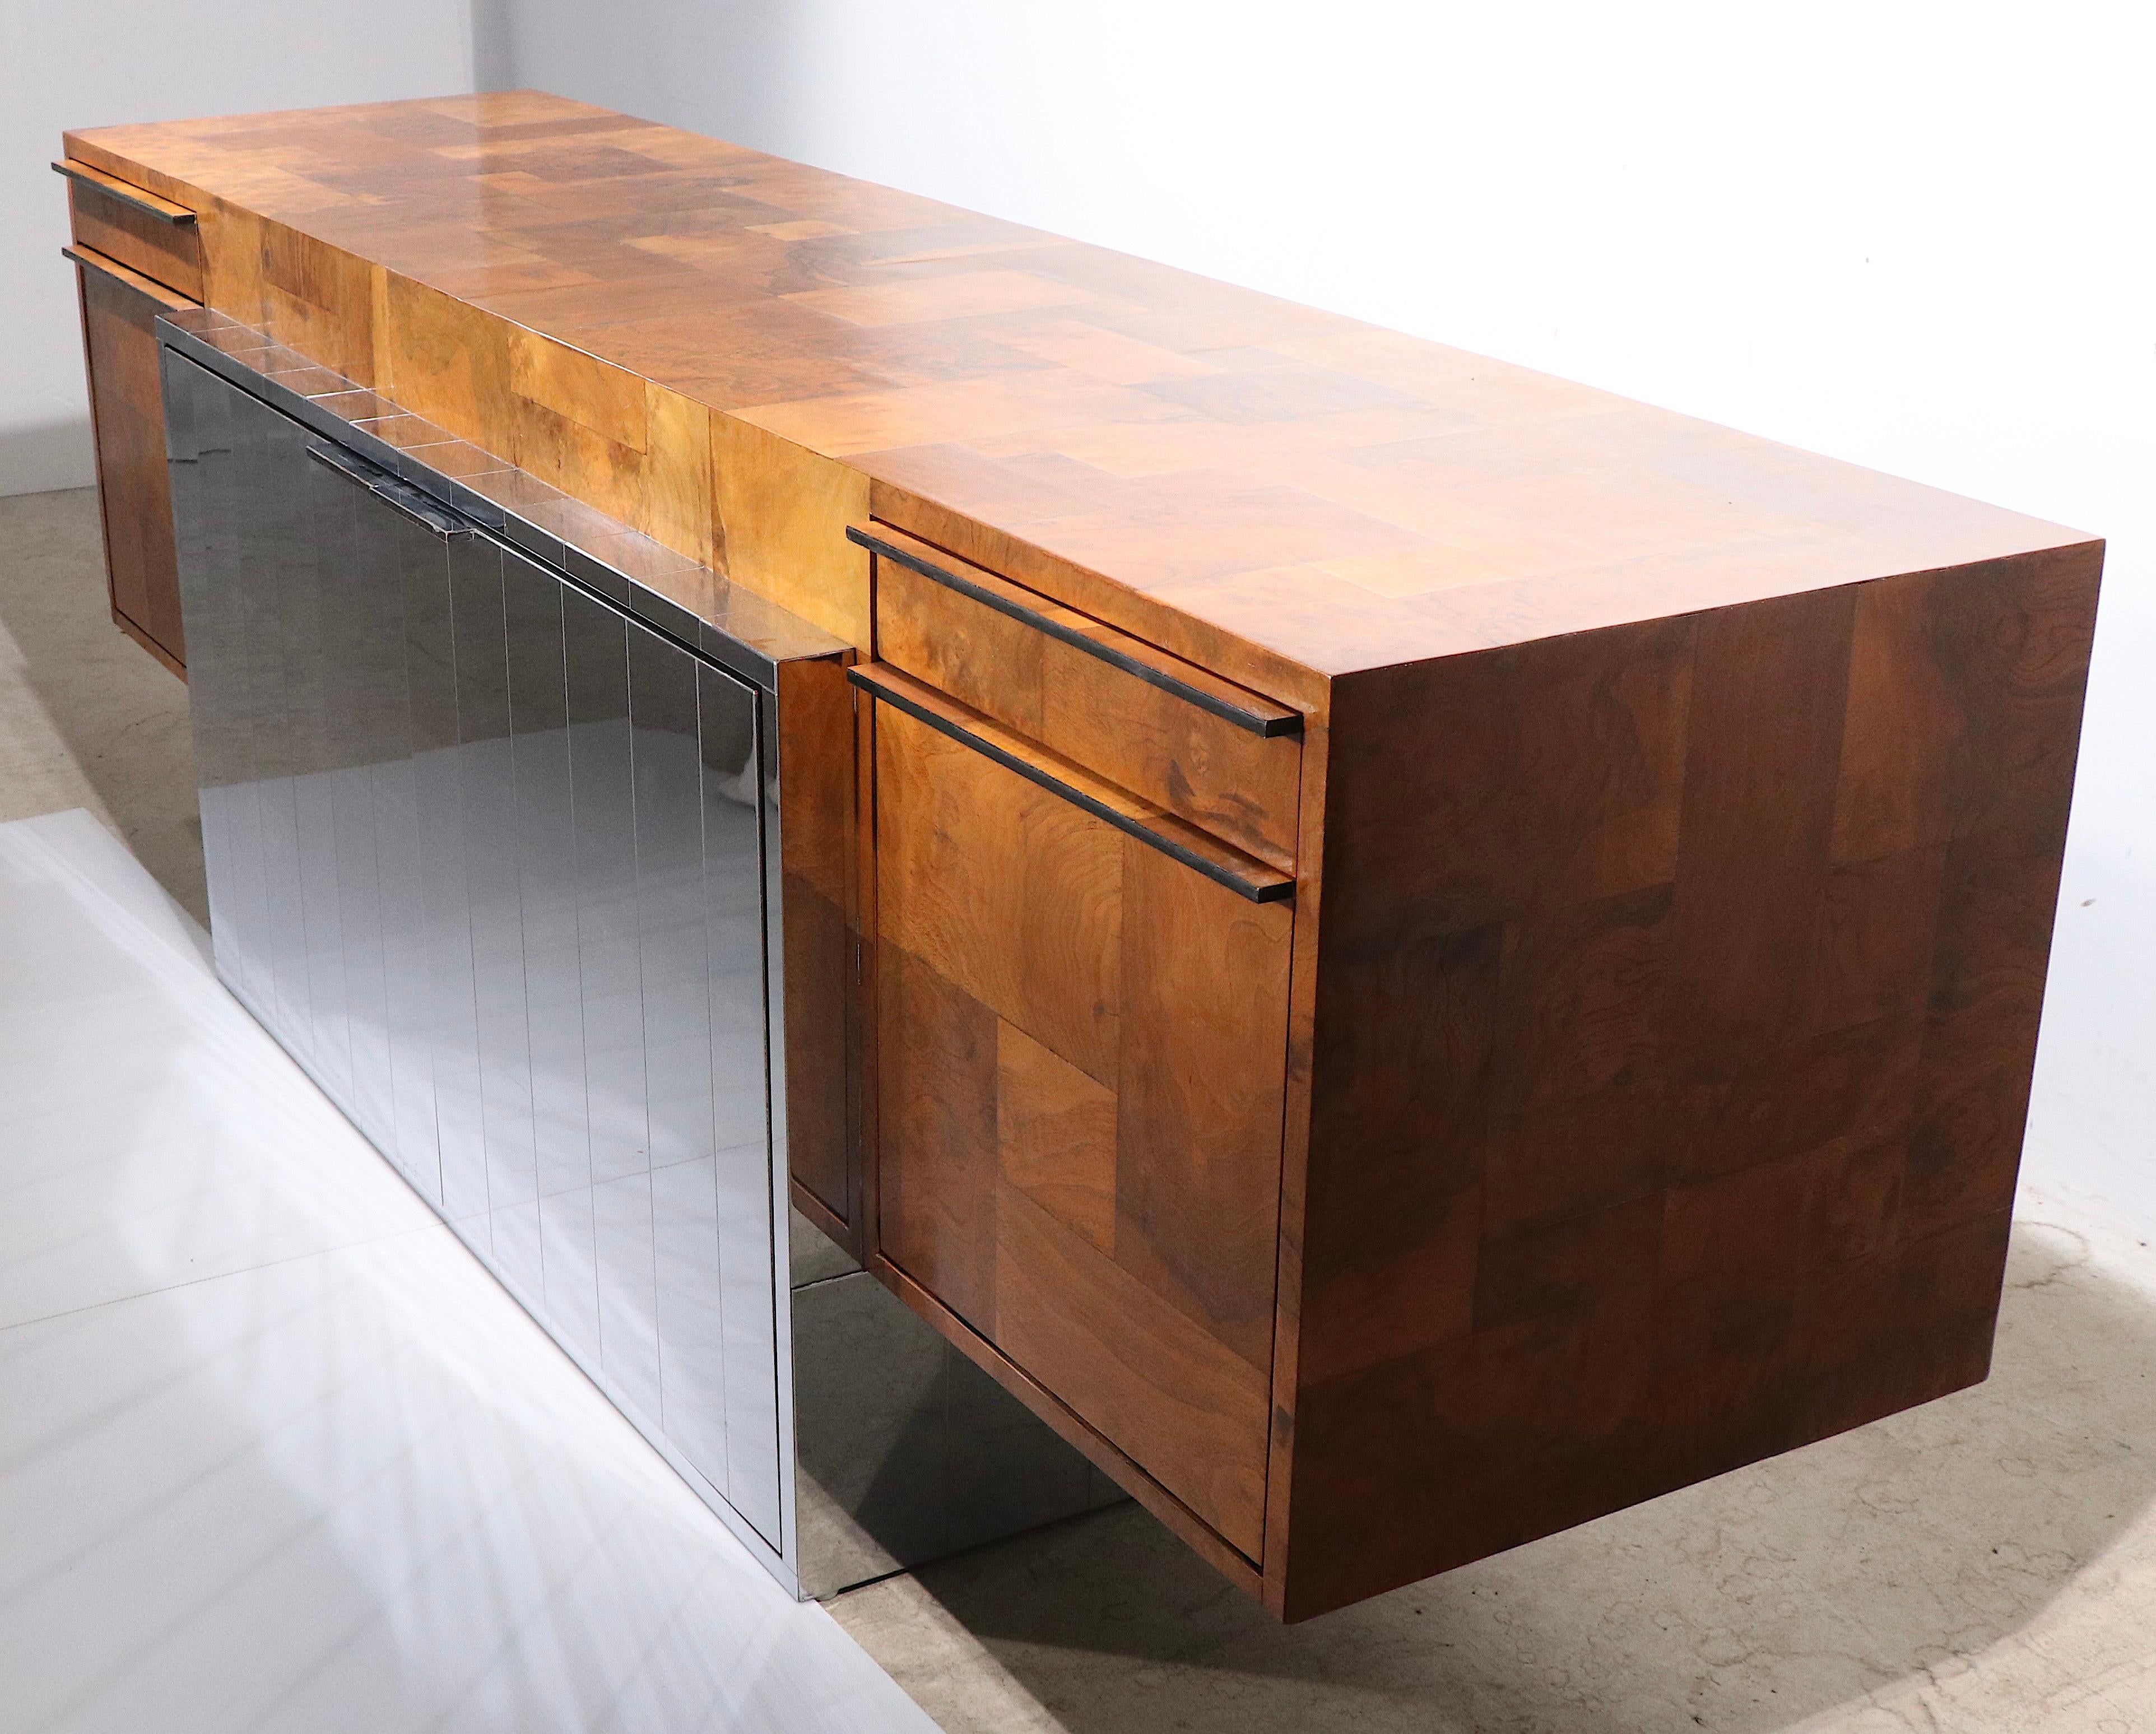 Chrome Paul Evans Directional Patchwork Credenza, c 1970's For Sale